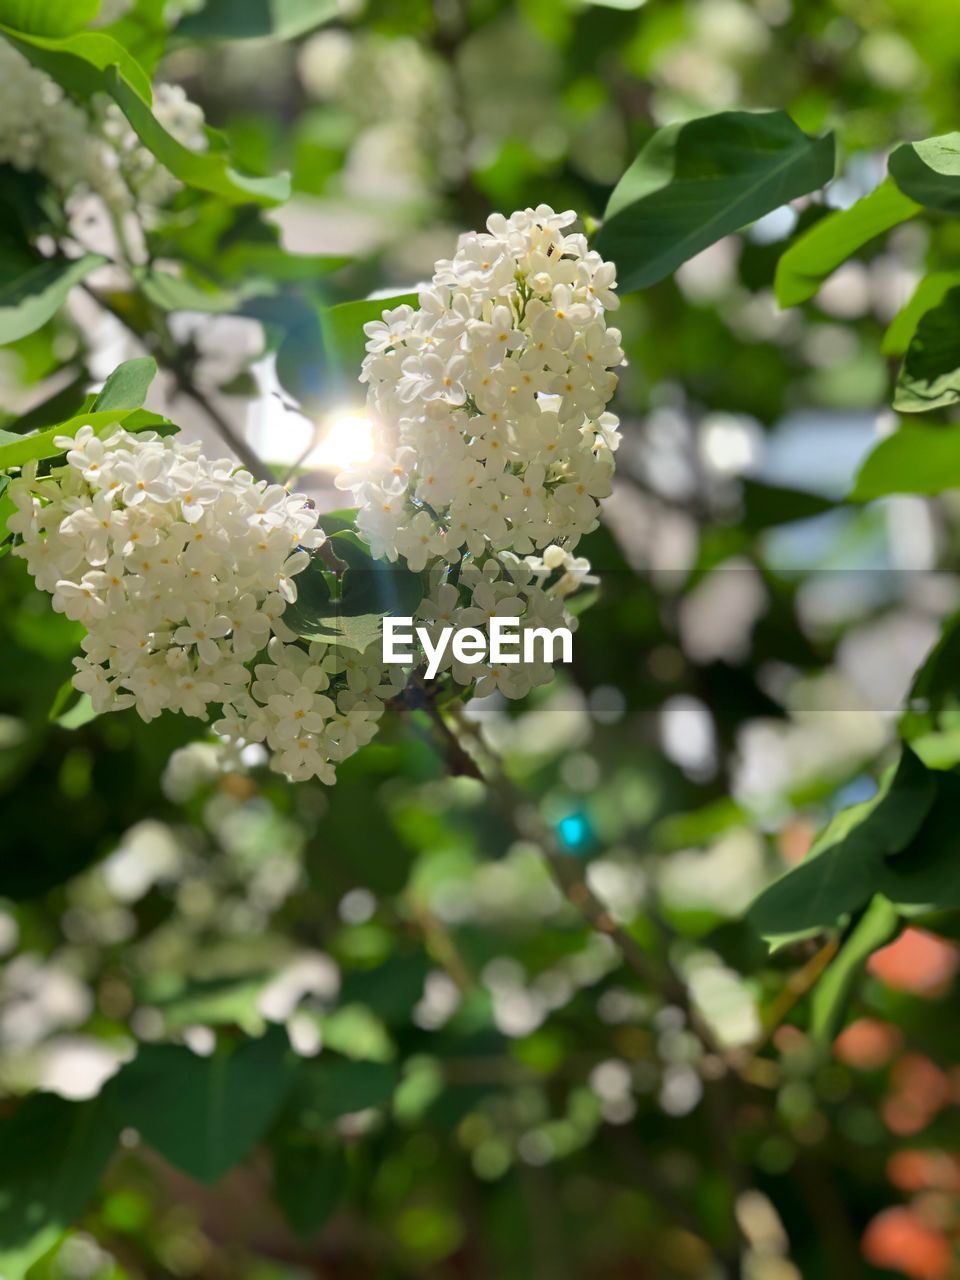 CLOSE-UP OF WHITE FLOWERING PLANT AGAINST TREE